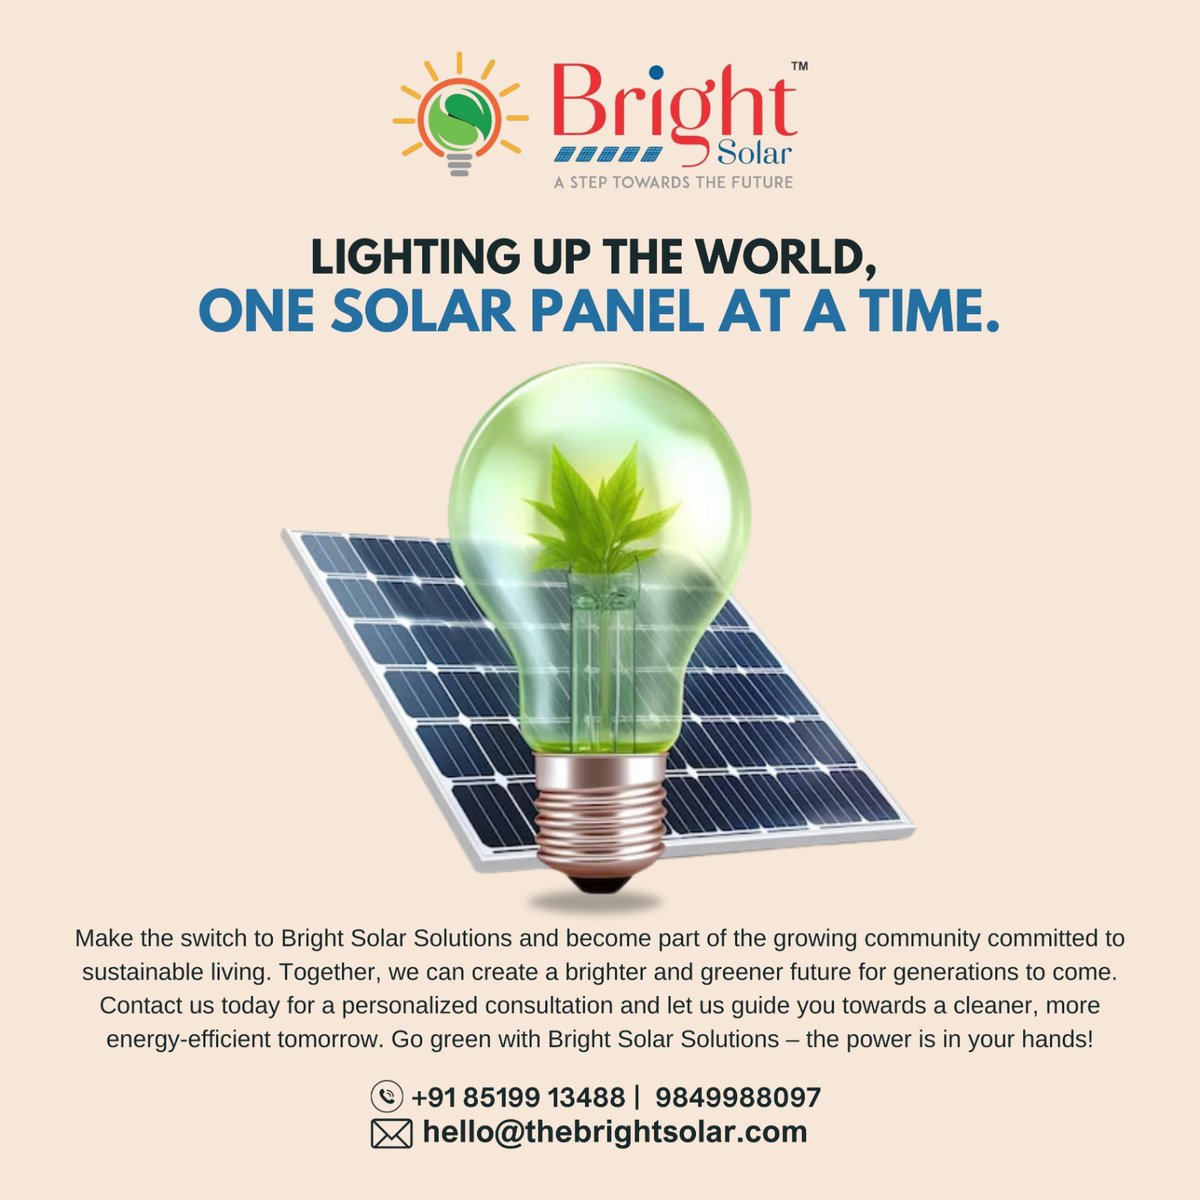 Make the switch to Bright Solar Solutions and join the movement toward sustainable living.

💚 Together, we can create a brighter and greener future for generations to come. 
#BrightSolar #SolarPowerRevolution #SustainableLiving #InnovationInSolar #BrighterTomorrow #solarcompany